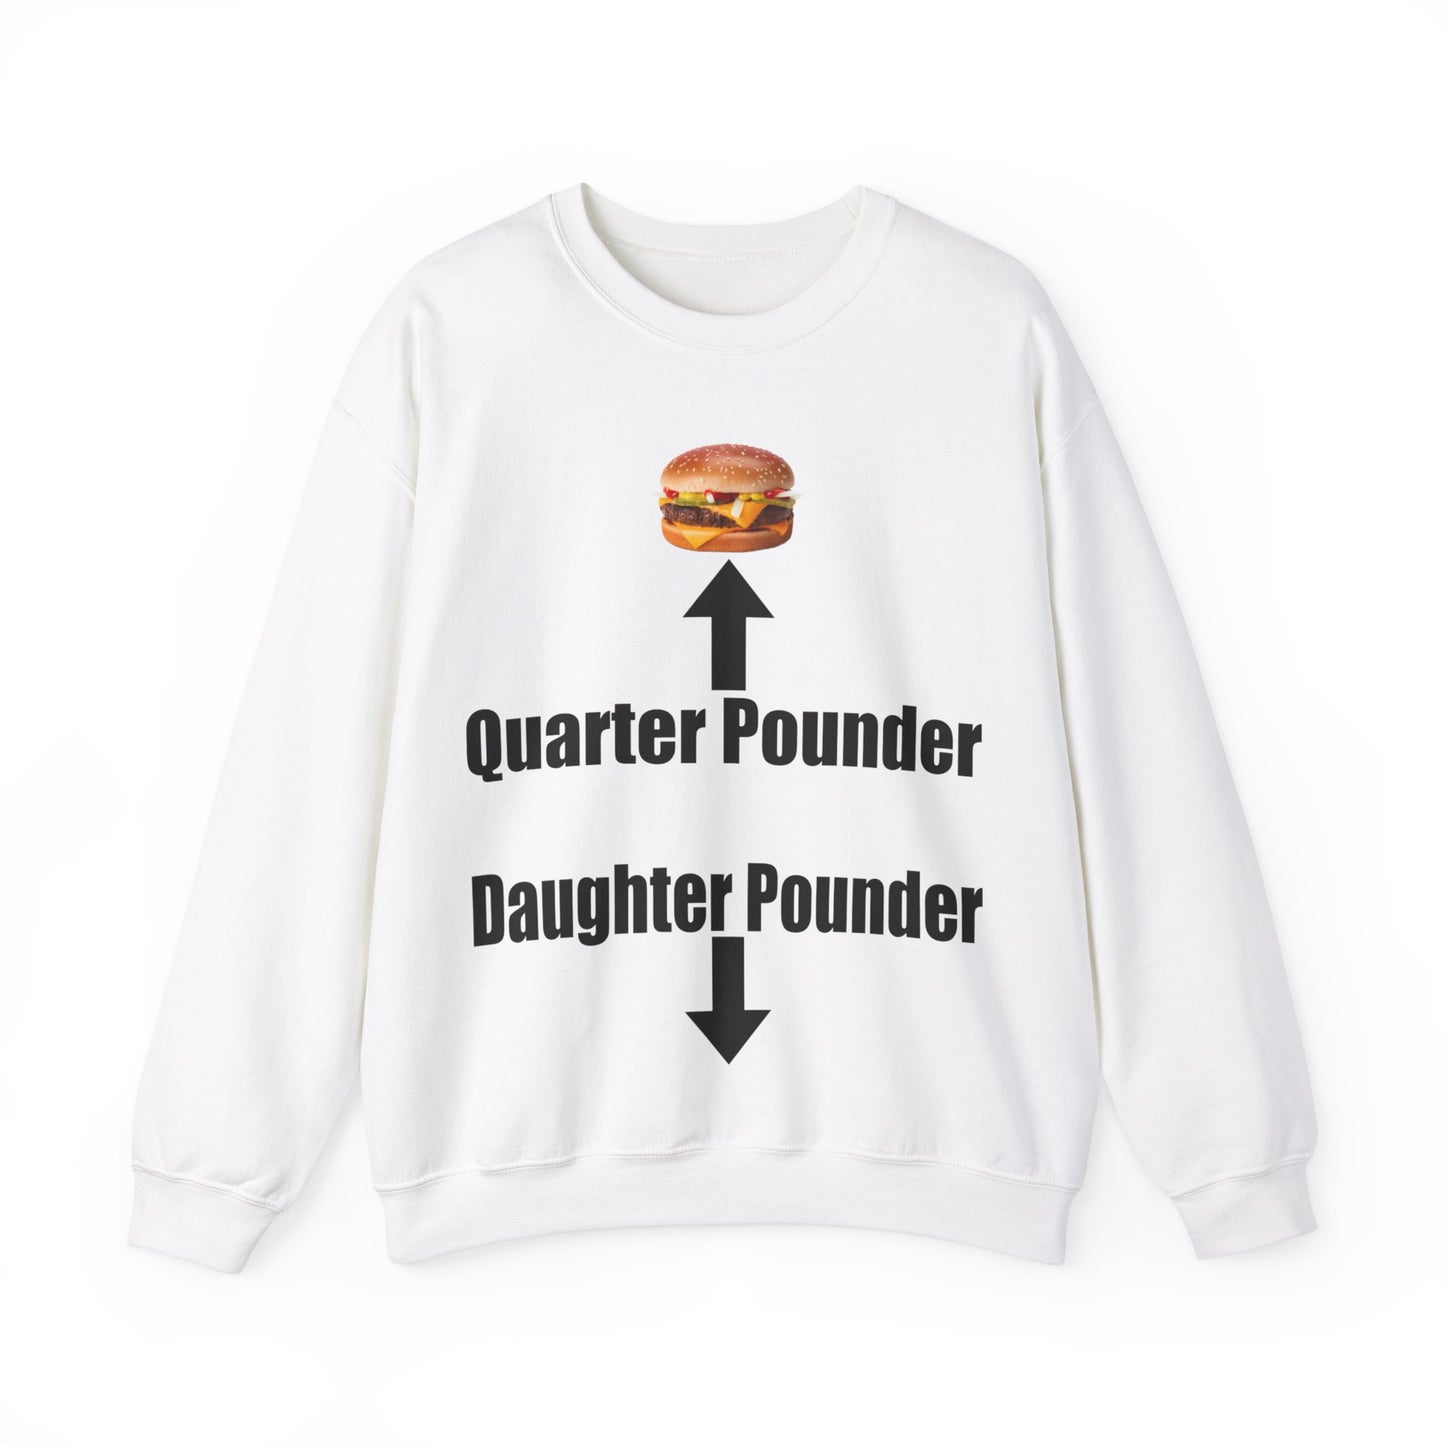 Daughter Pounder